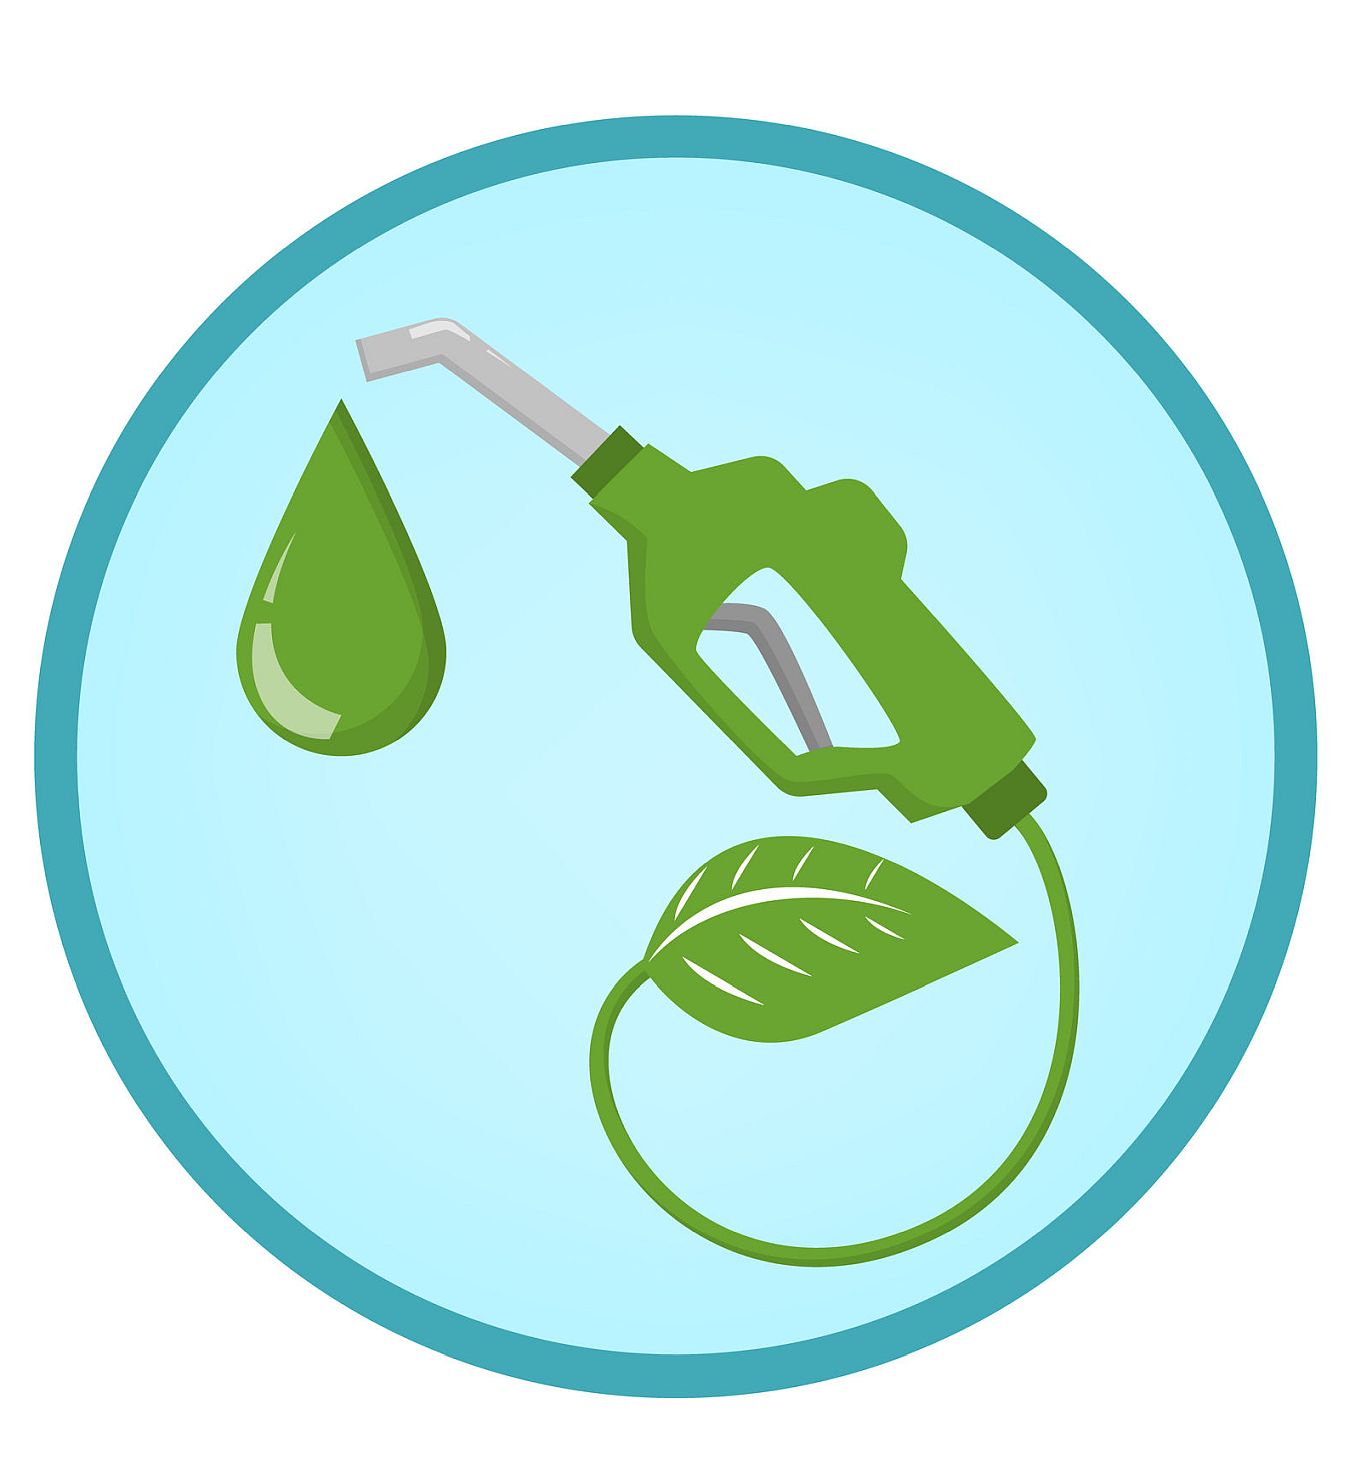 ENERGY TRANSITION: BIOFUELS AS A VIABLE ALTERNATIVE TO FOSSIL FUELS  